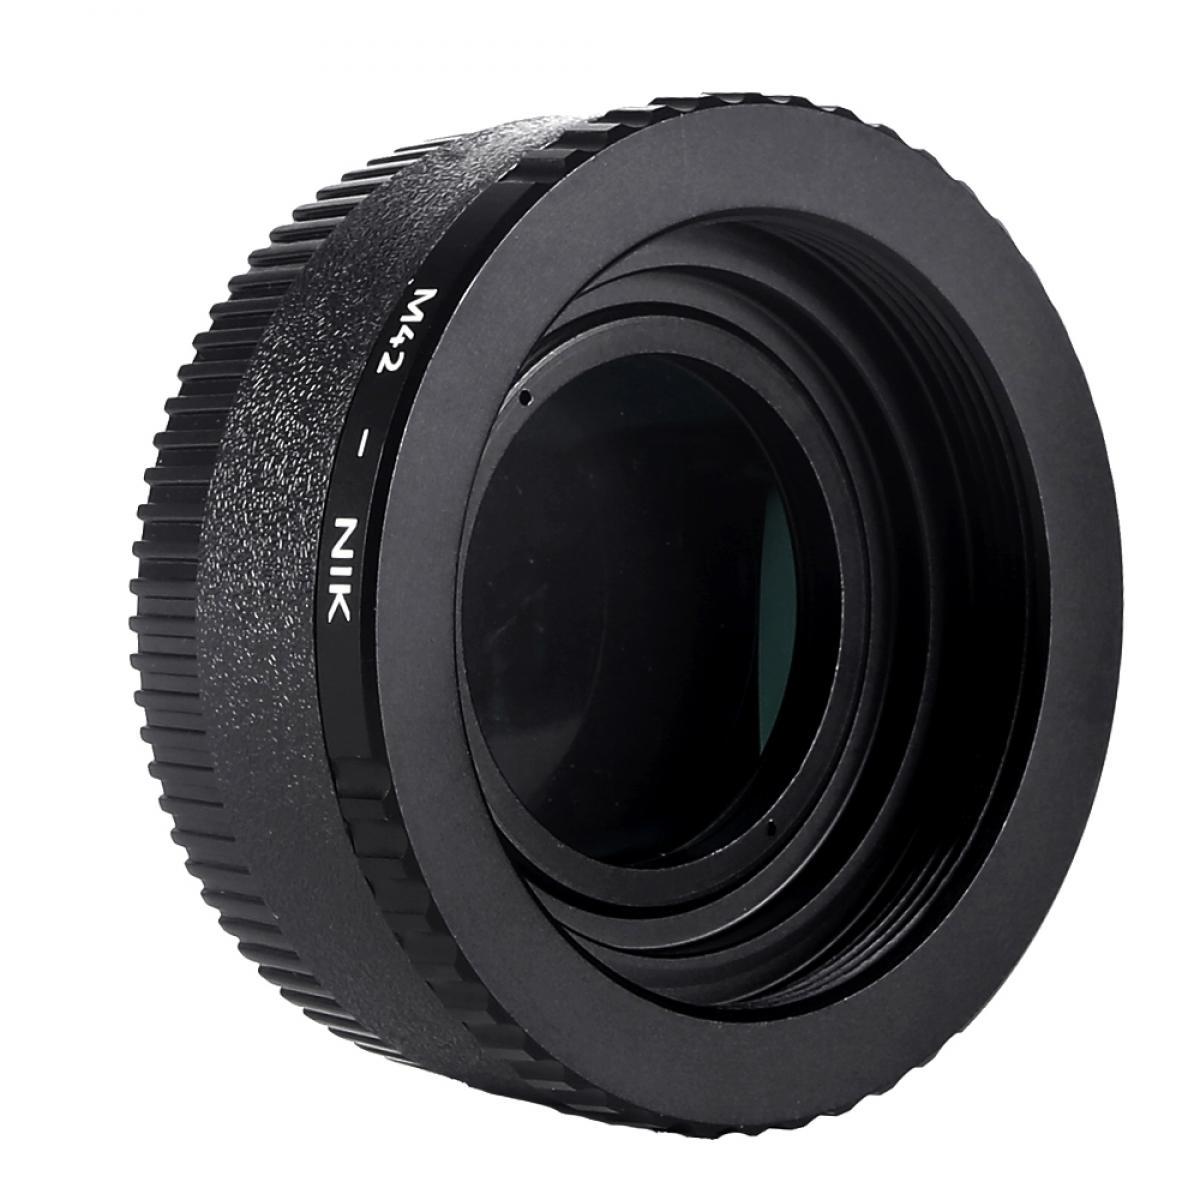 K&F Concept M10171 M42 Lenses to Nikon F Lens Mount Adapter with Optic Glass